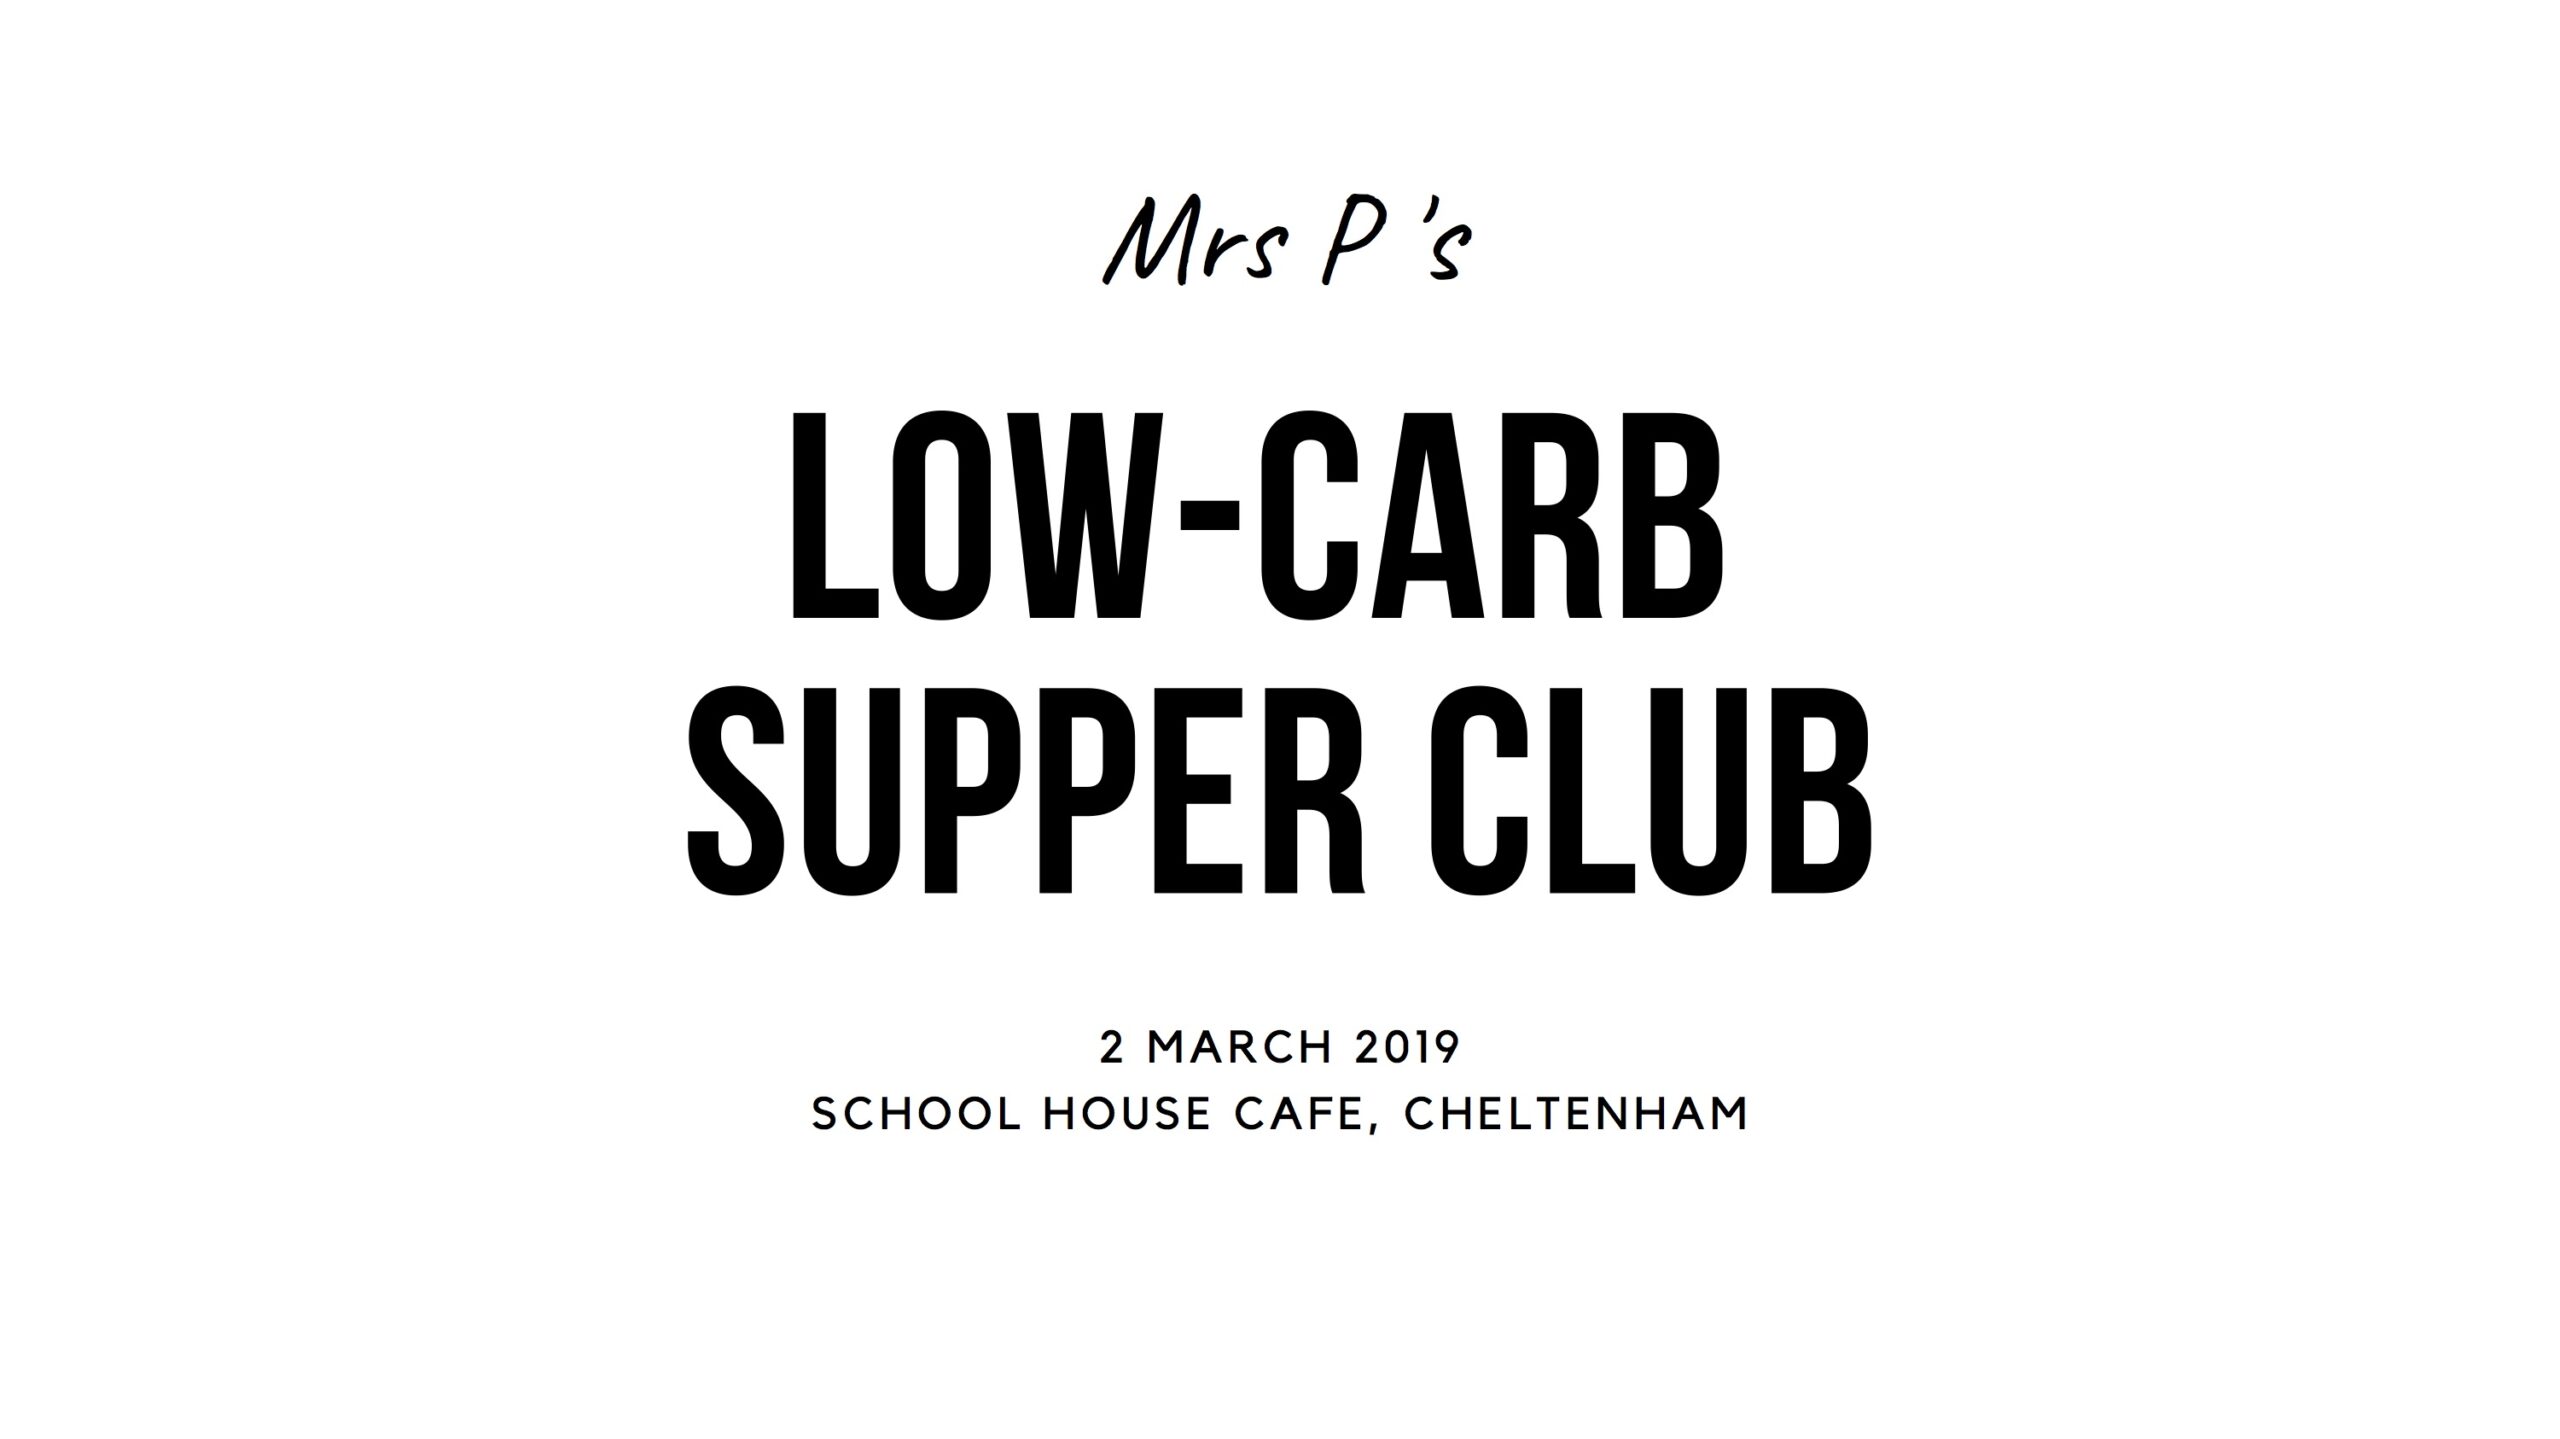 An Invitation to my March supper club